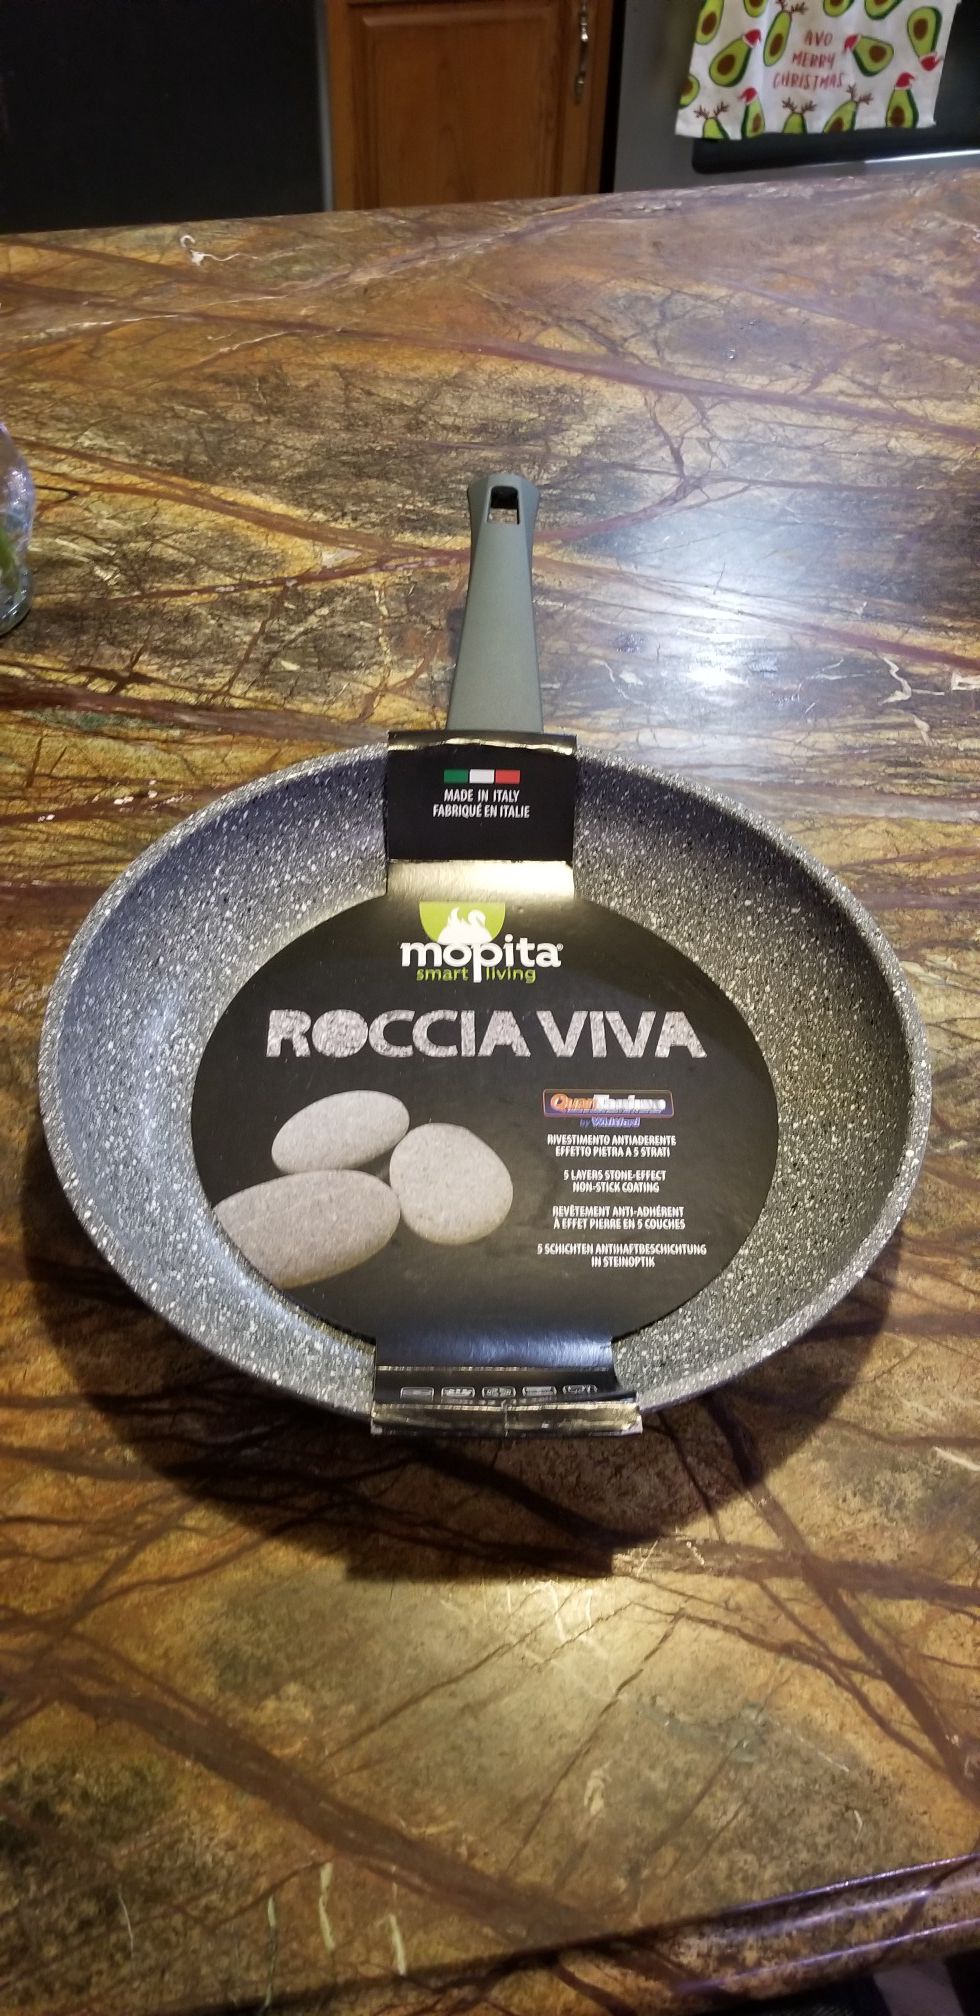 Pan - Roccia Viva for Sale in Columbia, MD - OfferUp